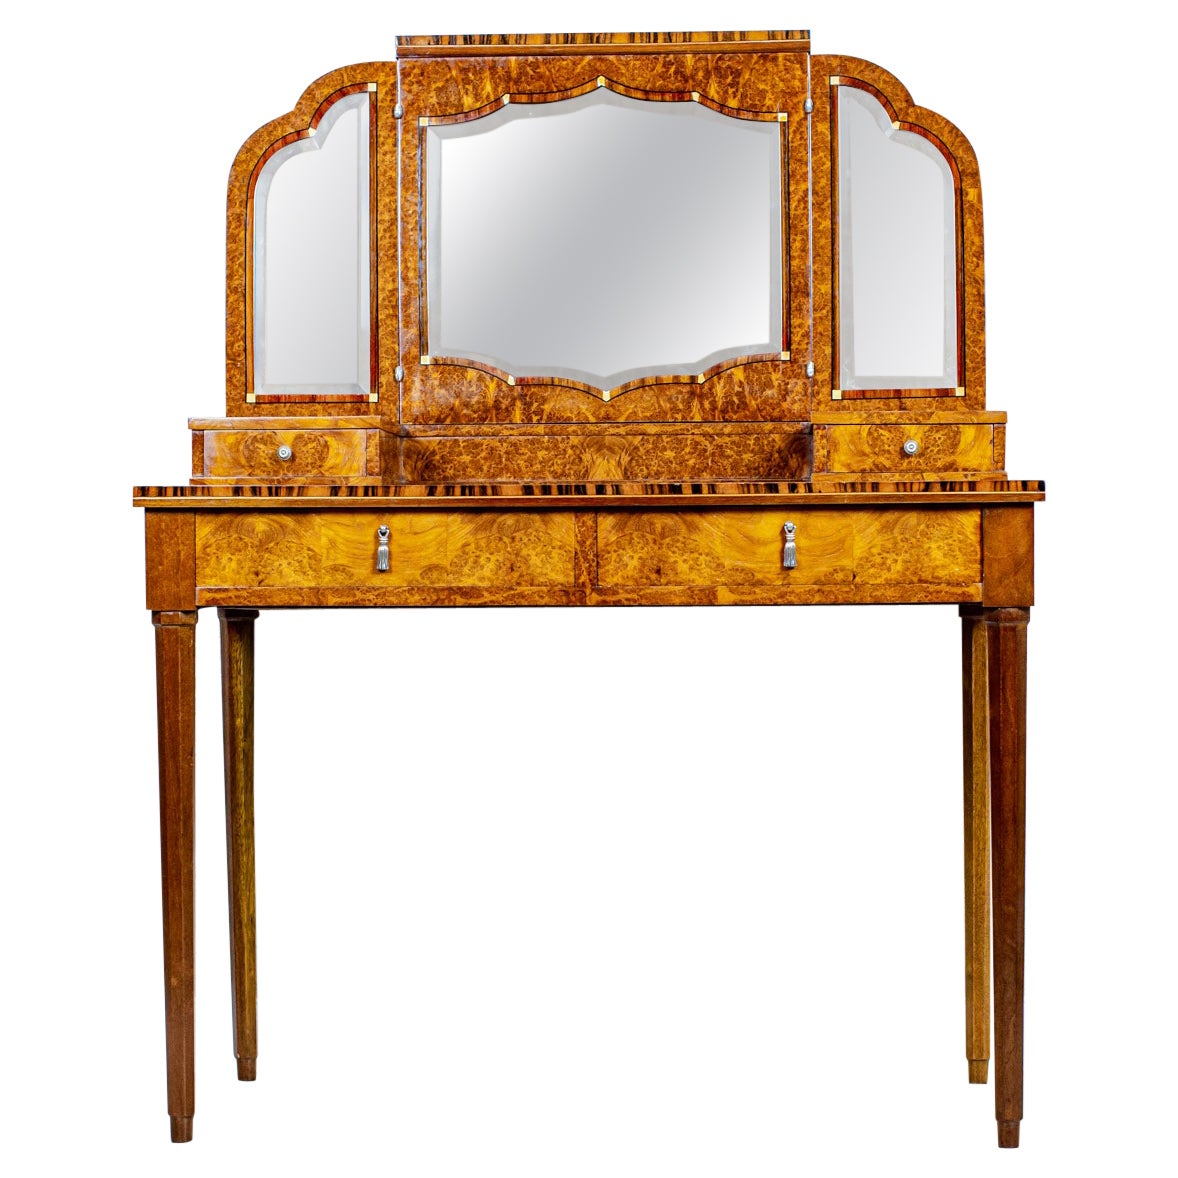 Lady's Vanity Table From the Early 20th Century